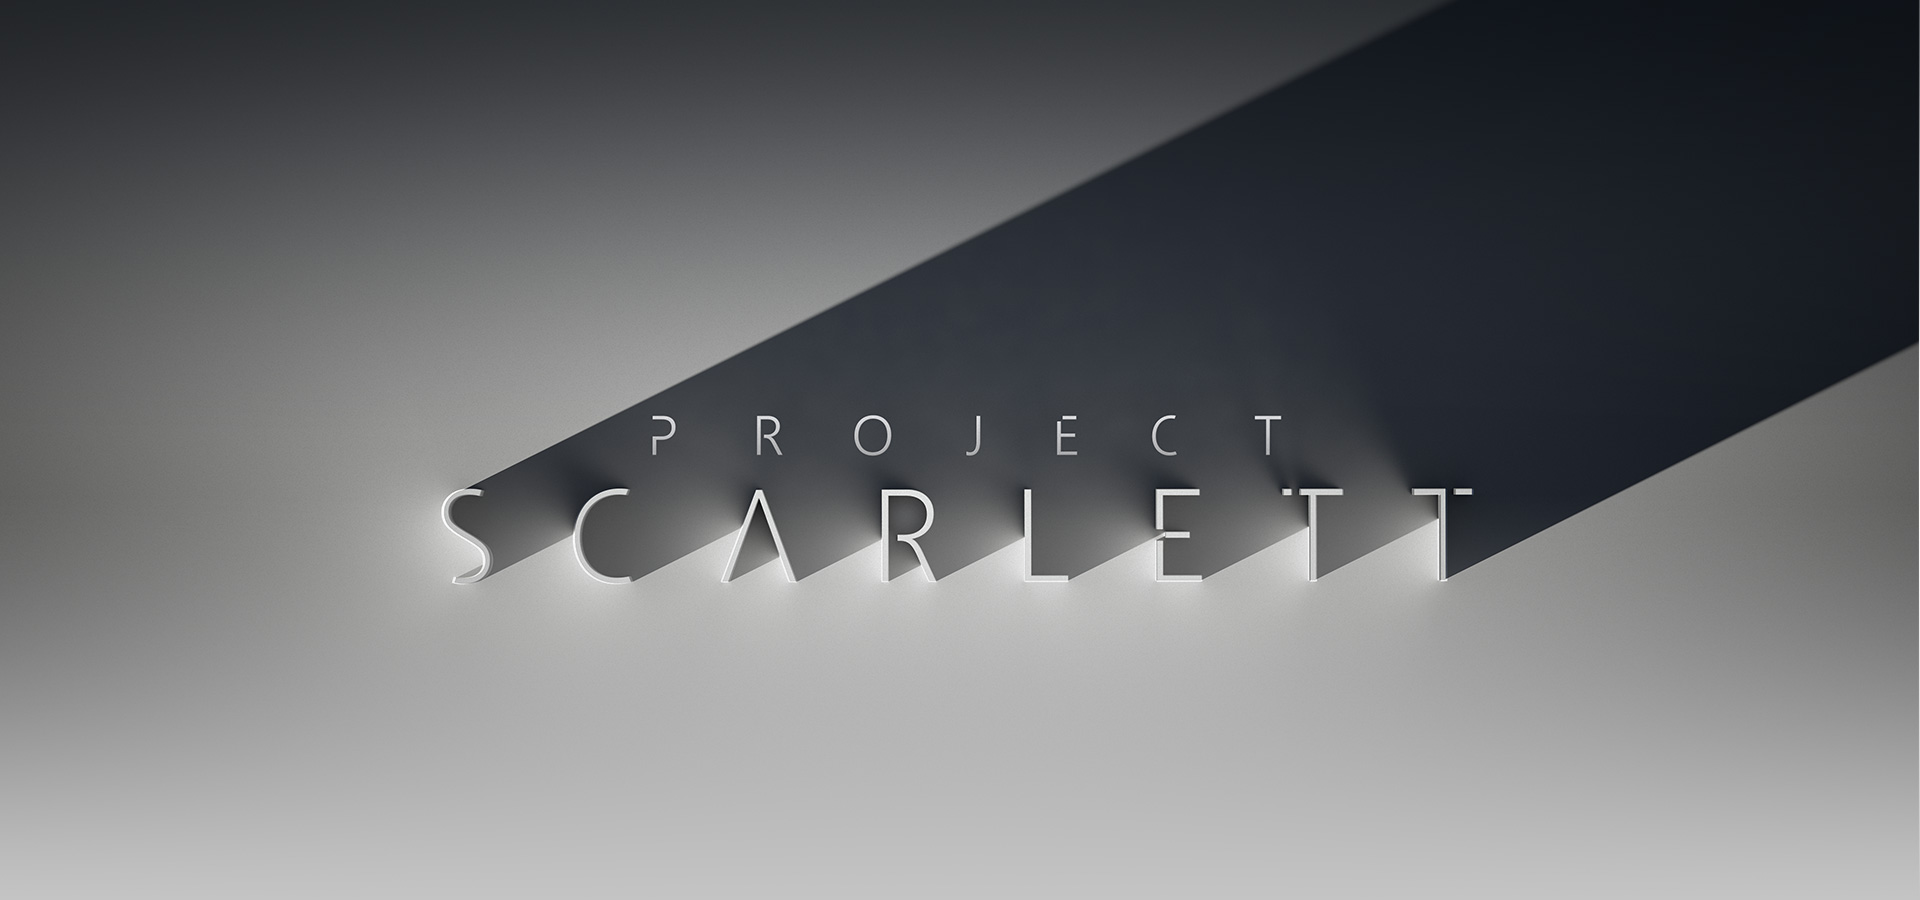 After Sony’s Announcement Yesterday, Here’s A Comparison of the PlayStation 5 and Xbox’s Project Scarlett